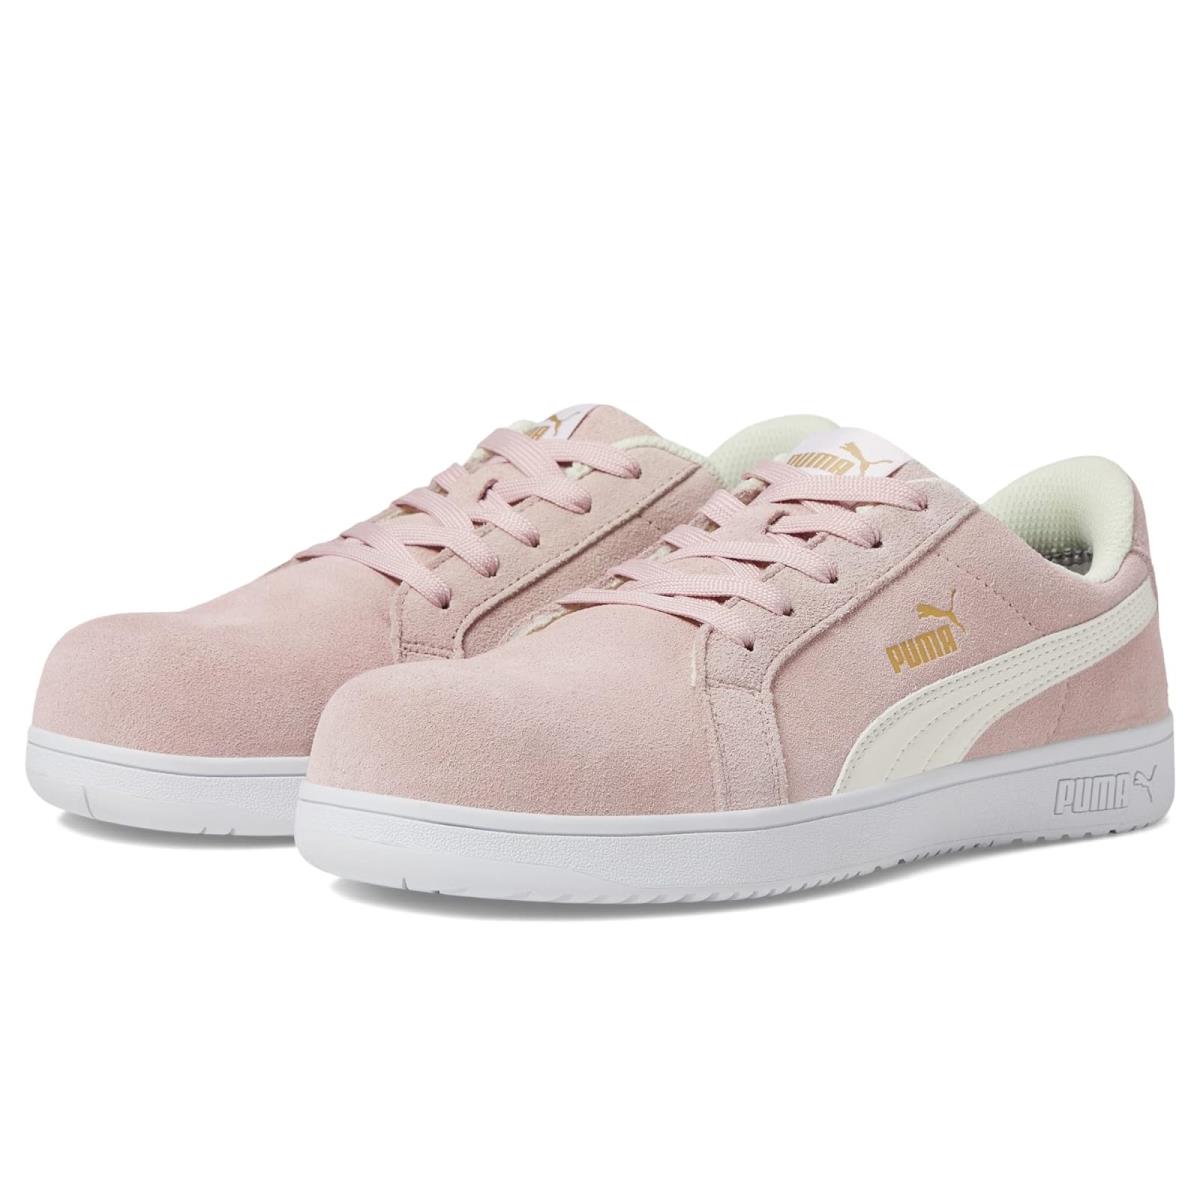 Woman`s Sneakers Athletic Shoes Puma Safety Iconic Suede Low Astm EH Pink/White